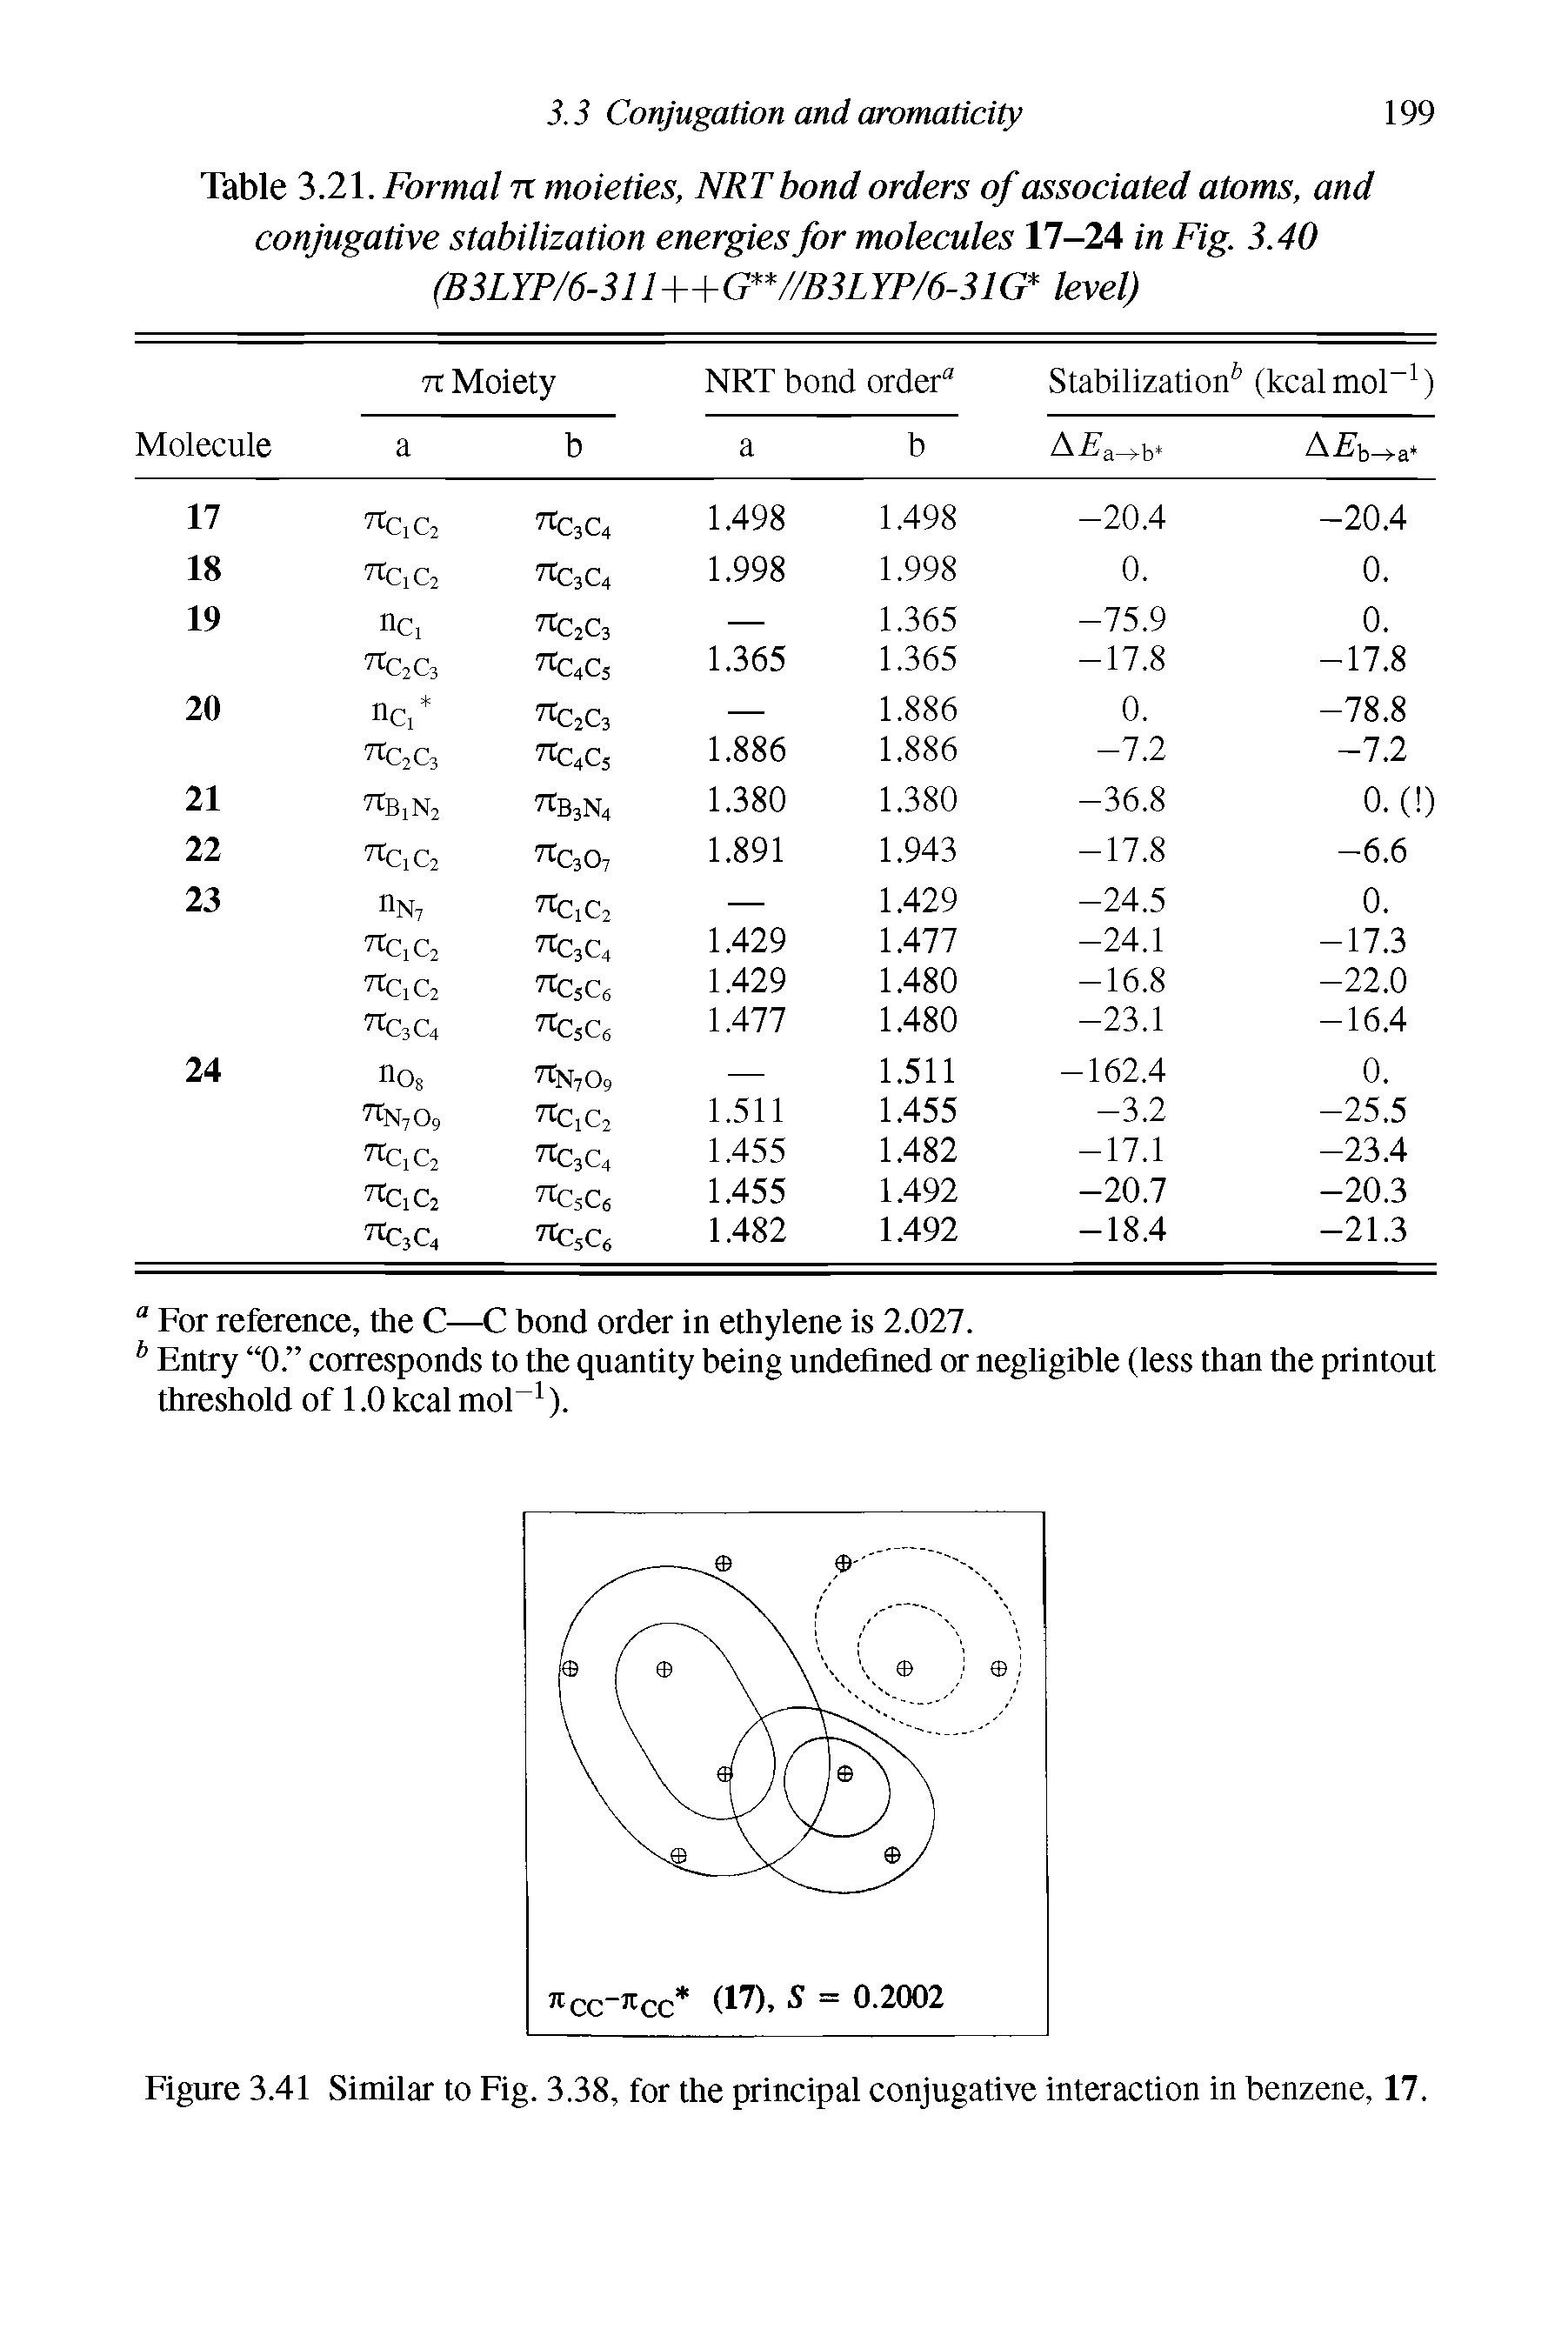 Table 3.21. Formal n moieties, NRT bond orders of associated atoms, and conjugative stabilization energies for molecules 17-24 in Fig. 3.40 (B3LYP/6-311++G //B3LYP/6-31G level)...